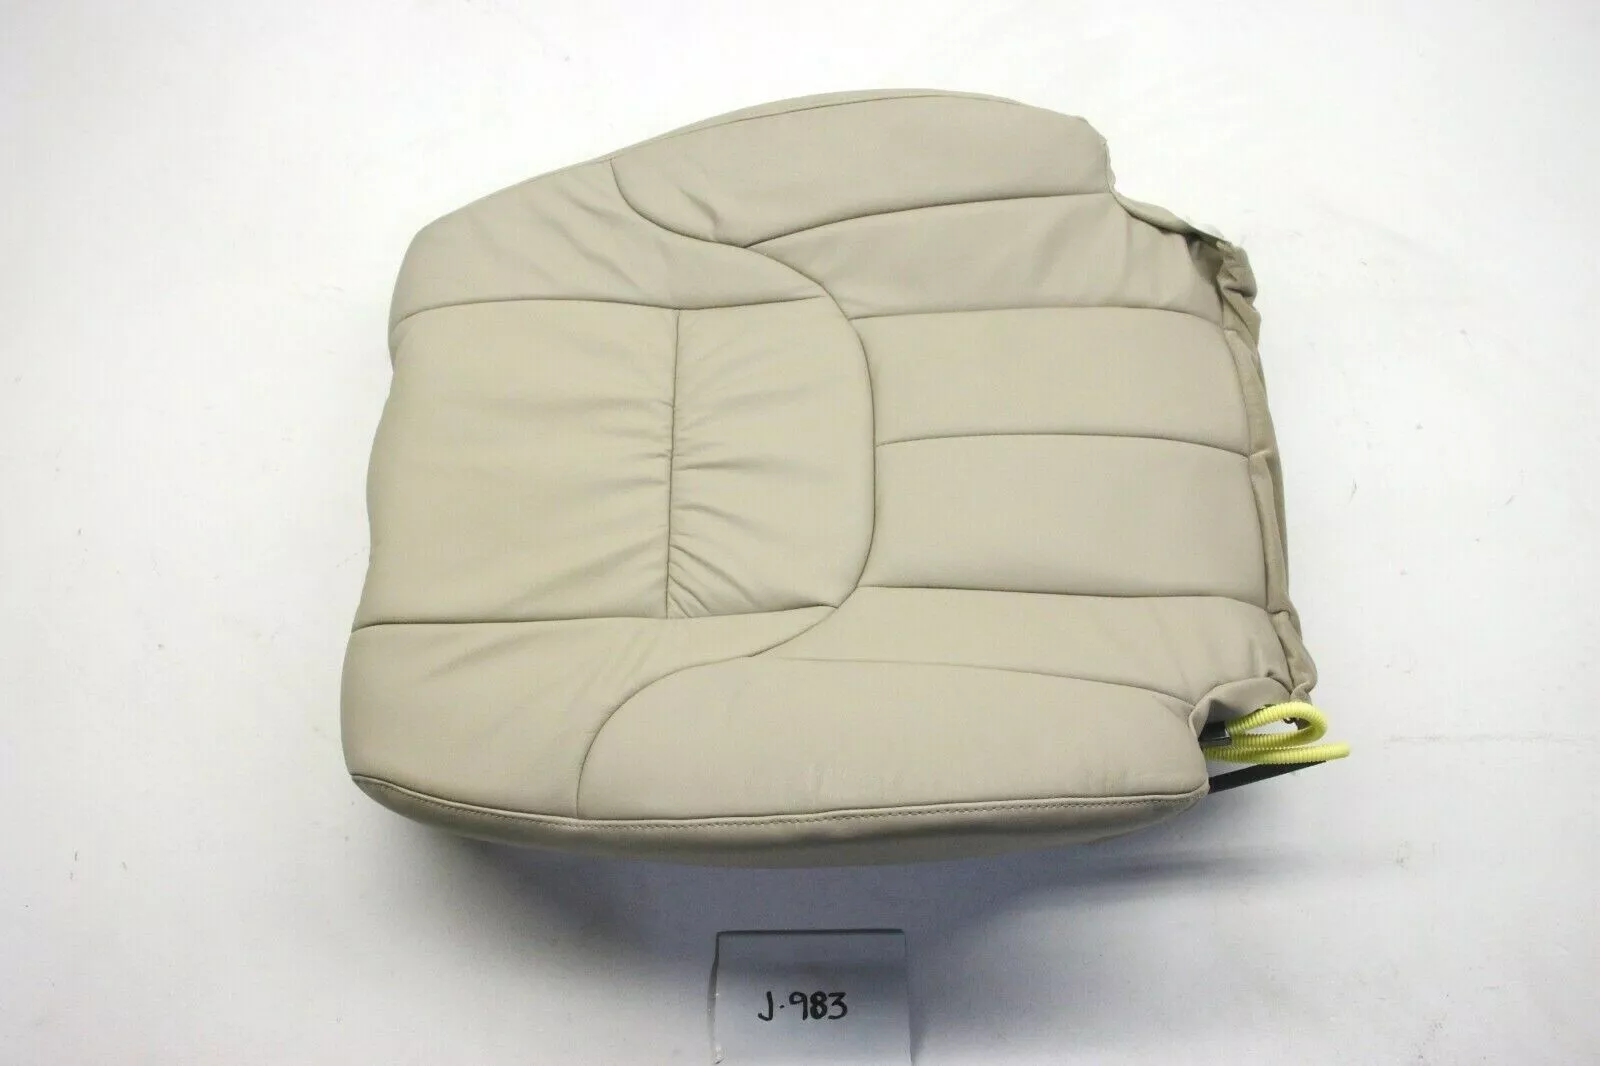 New OEM Toyota Front RH Seat Cushion and Cover 2000-2004 Avalon 71430-AC... - $123.75